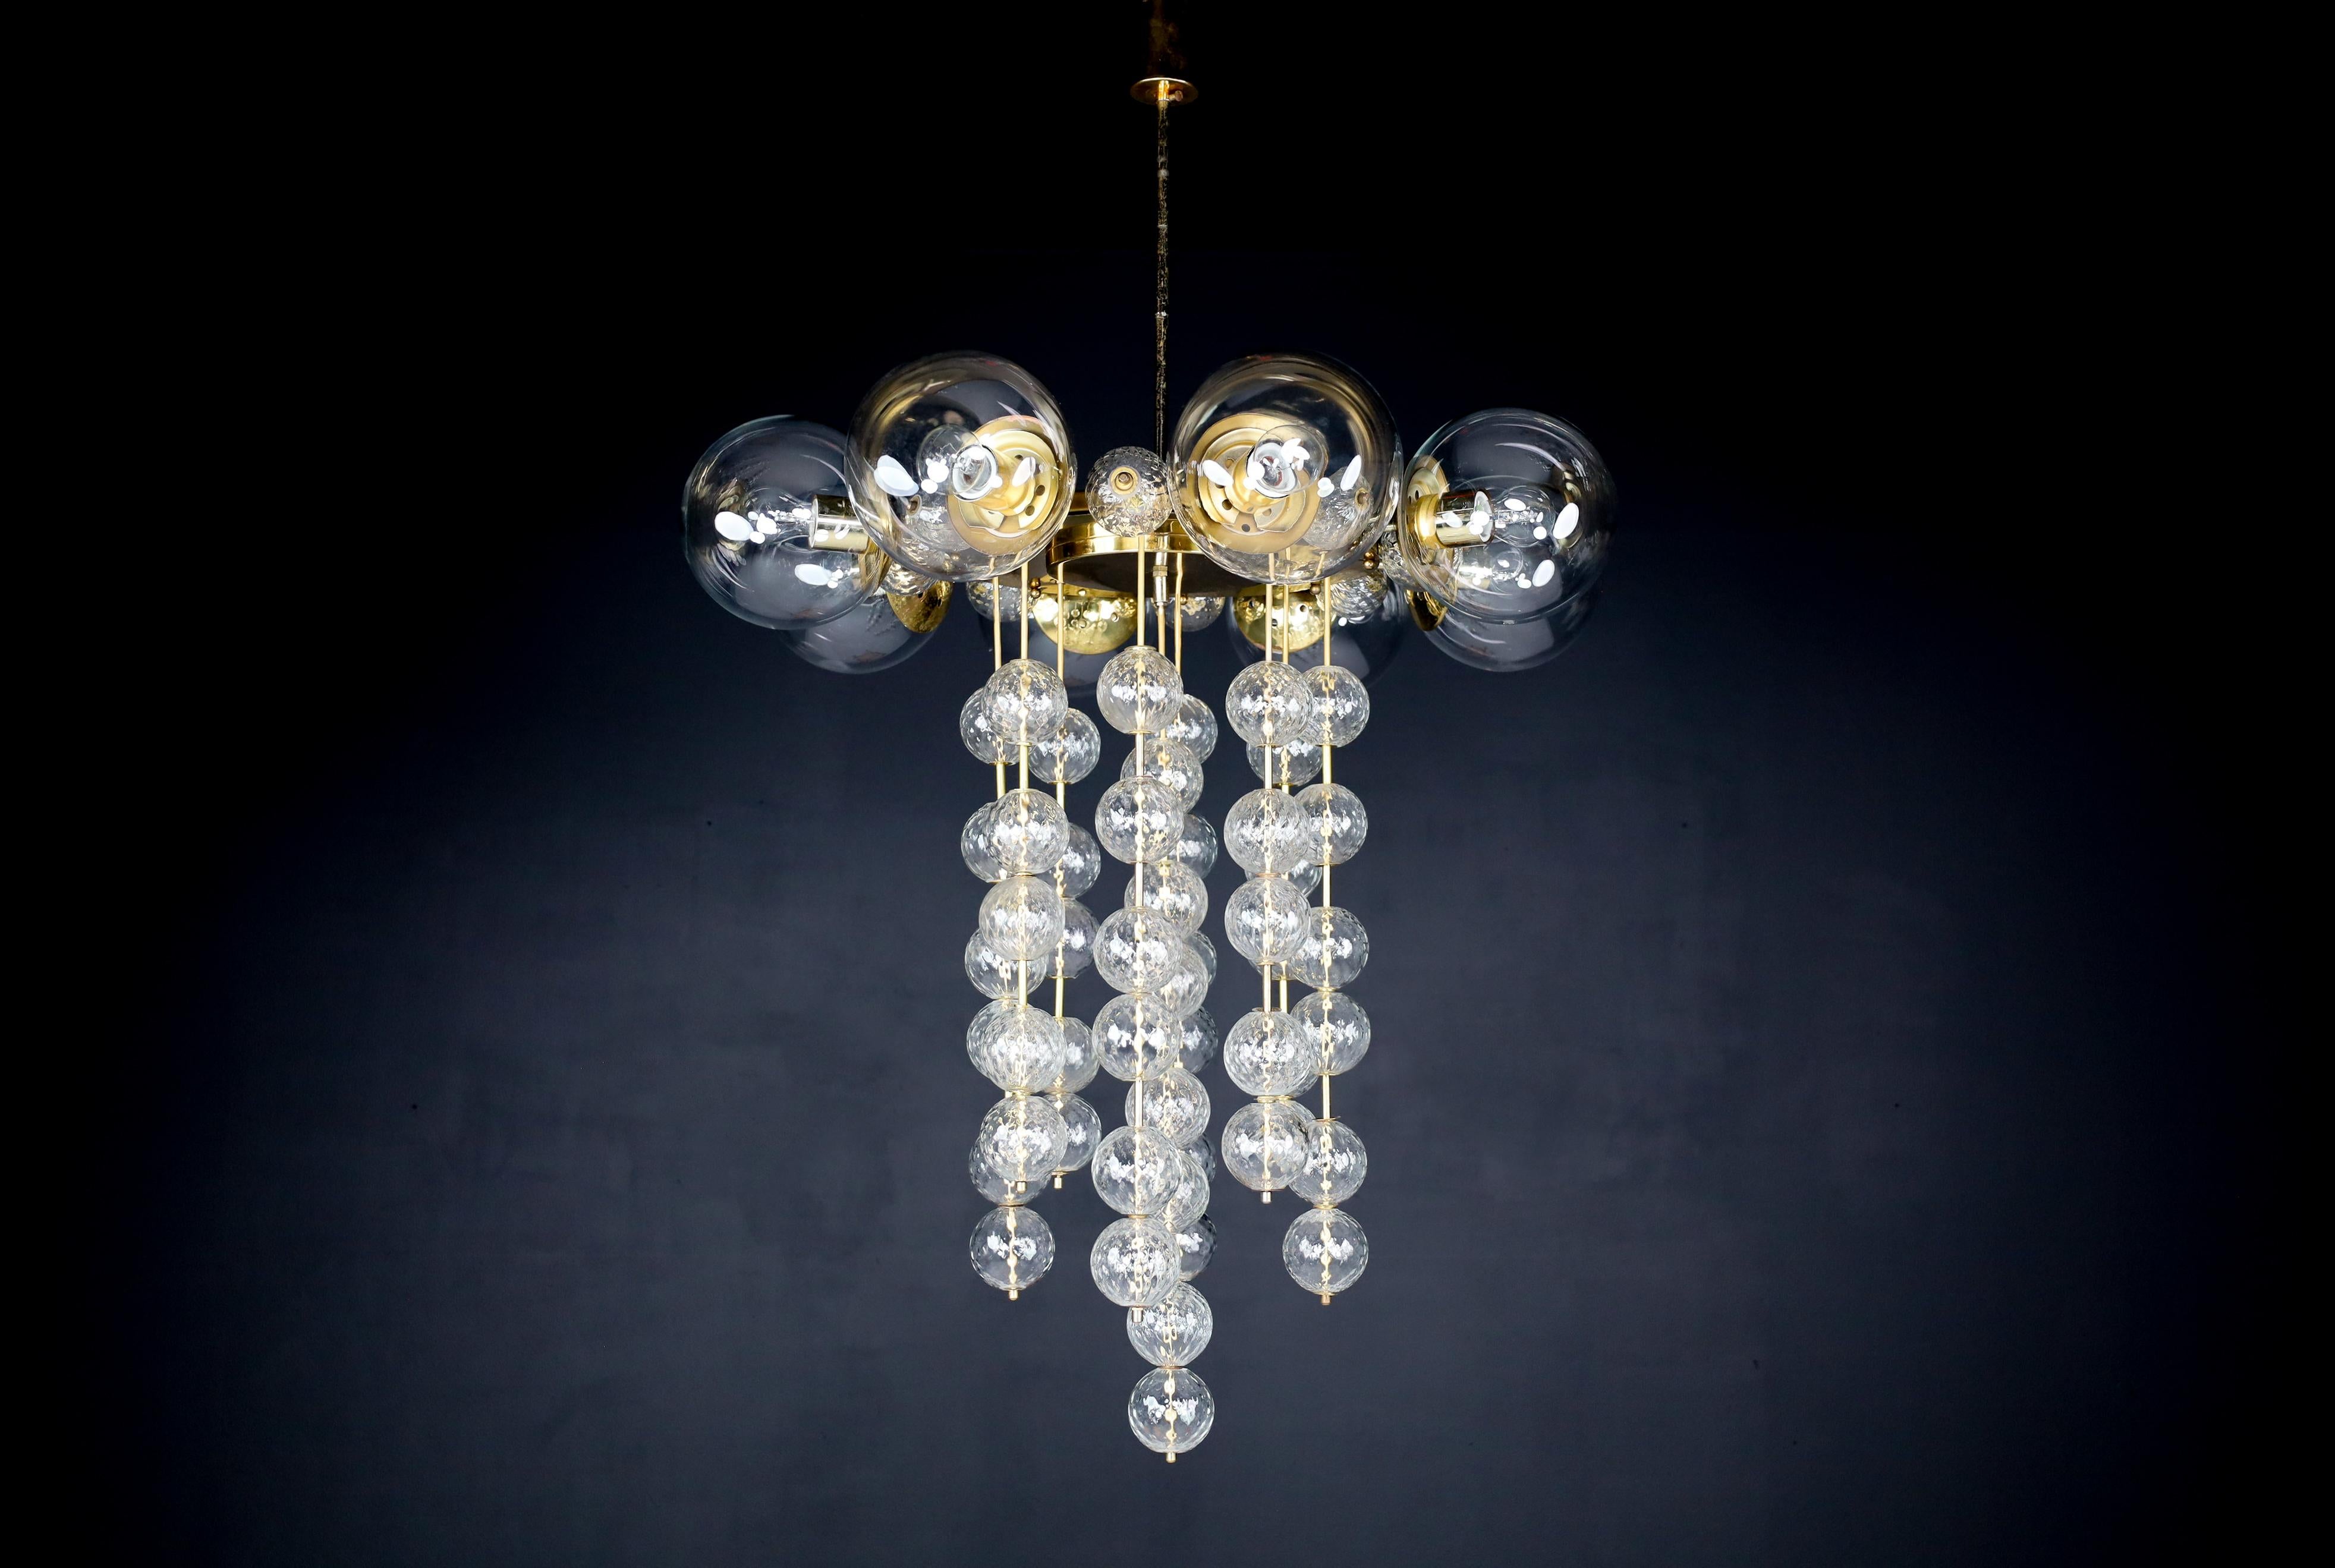 Grand Chandelier with Brass Fixture and Hand-blowed Glass Globes, 1960s For Sale 14